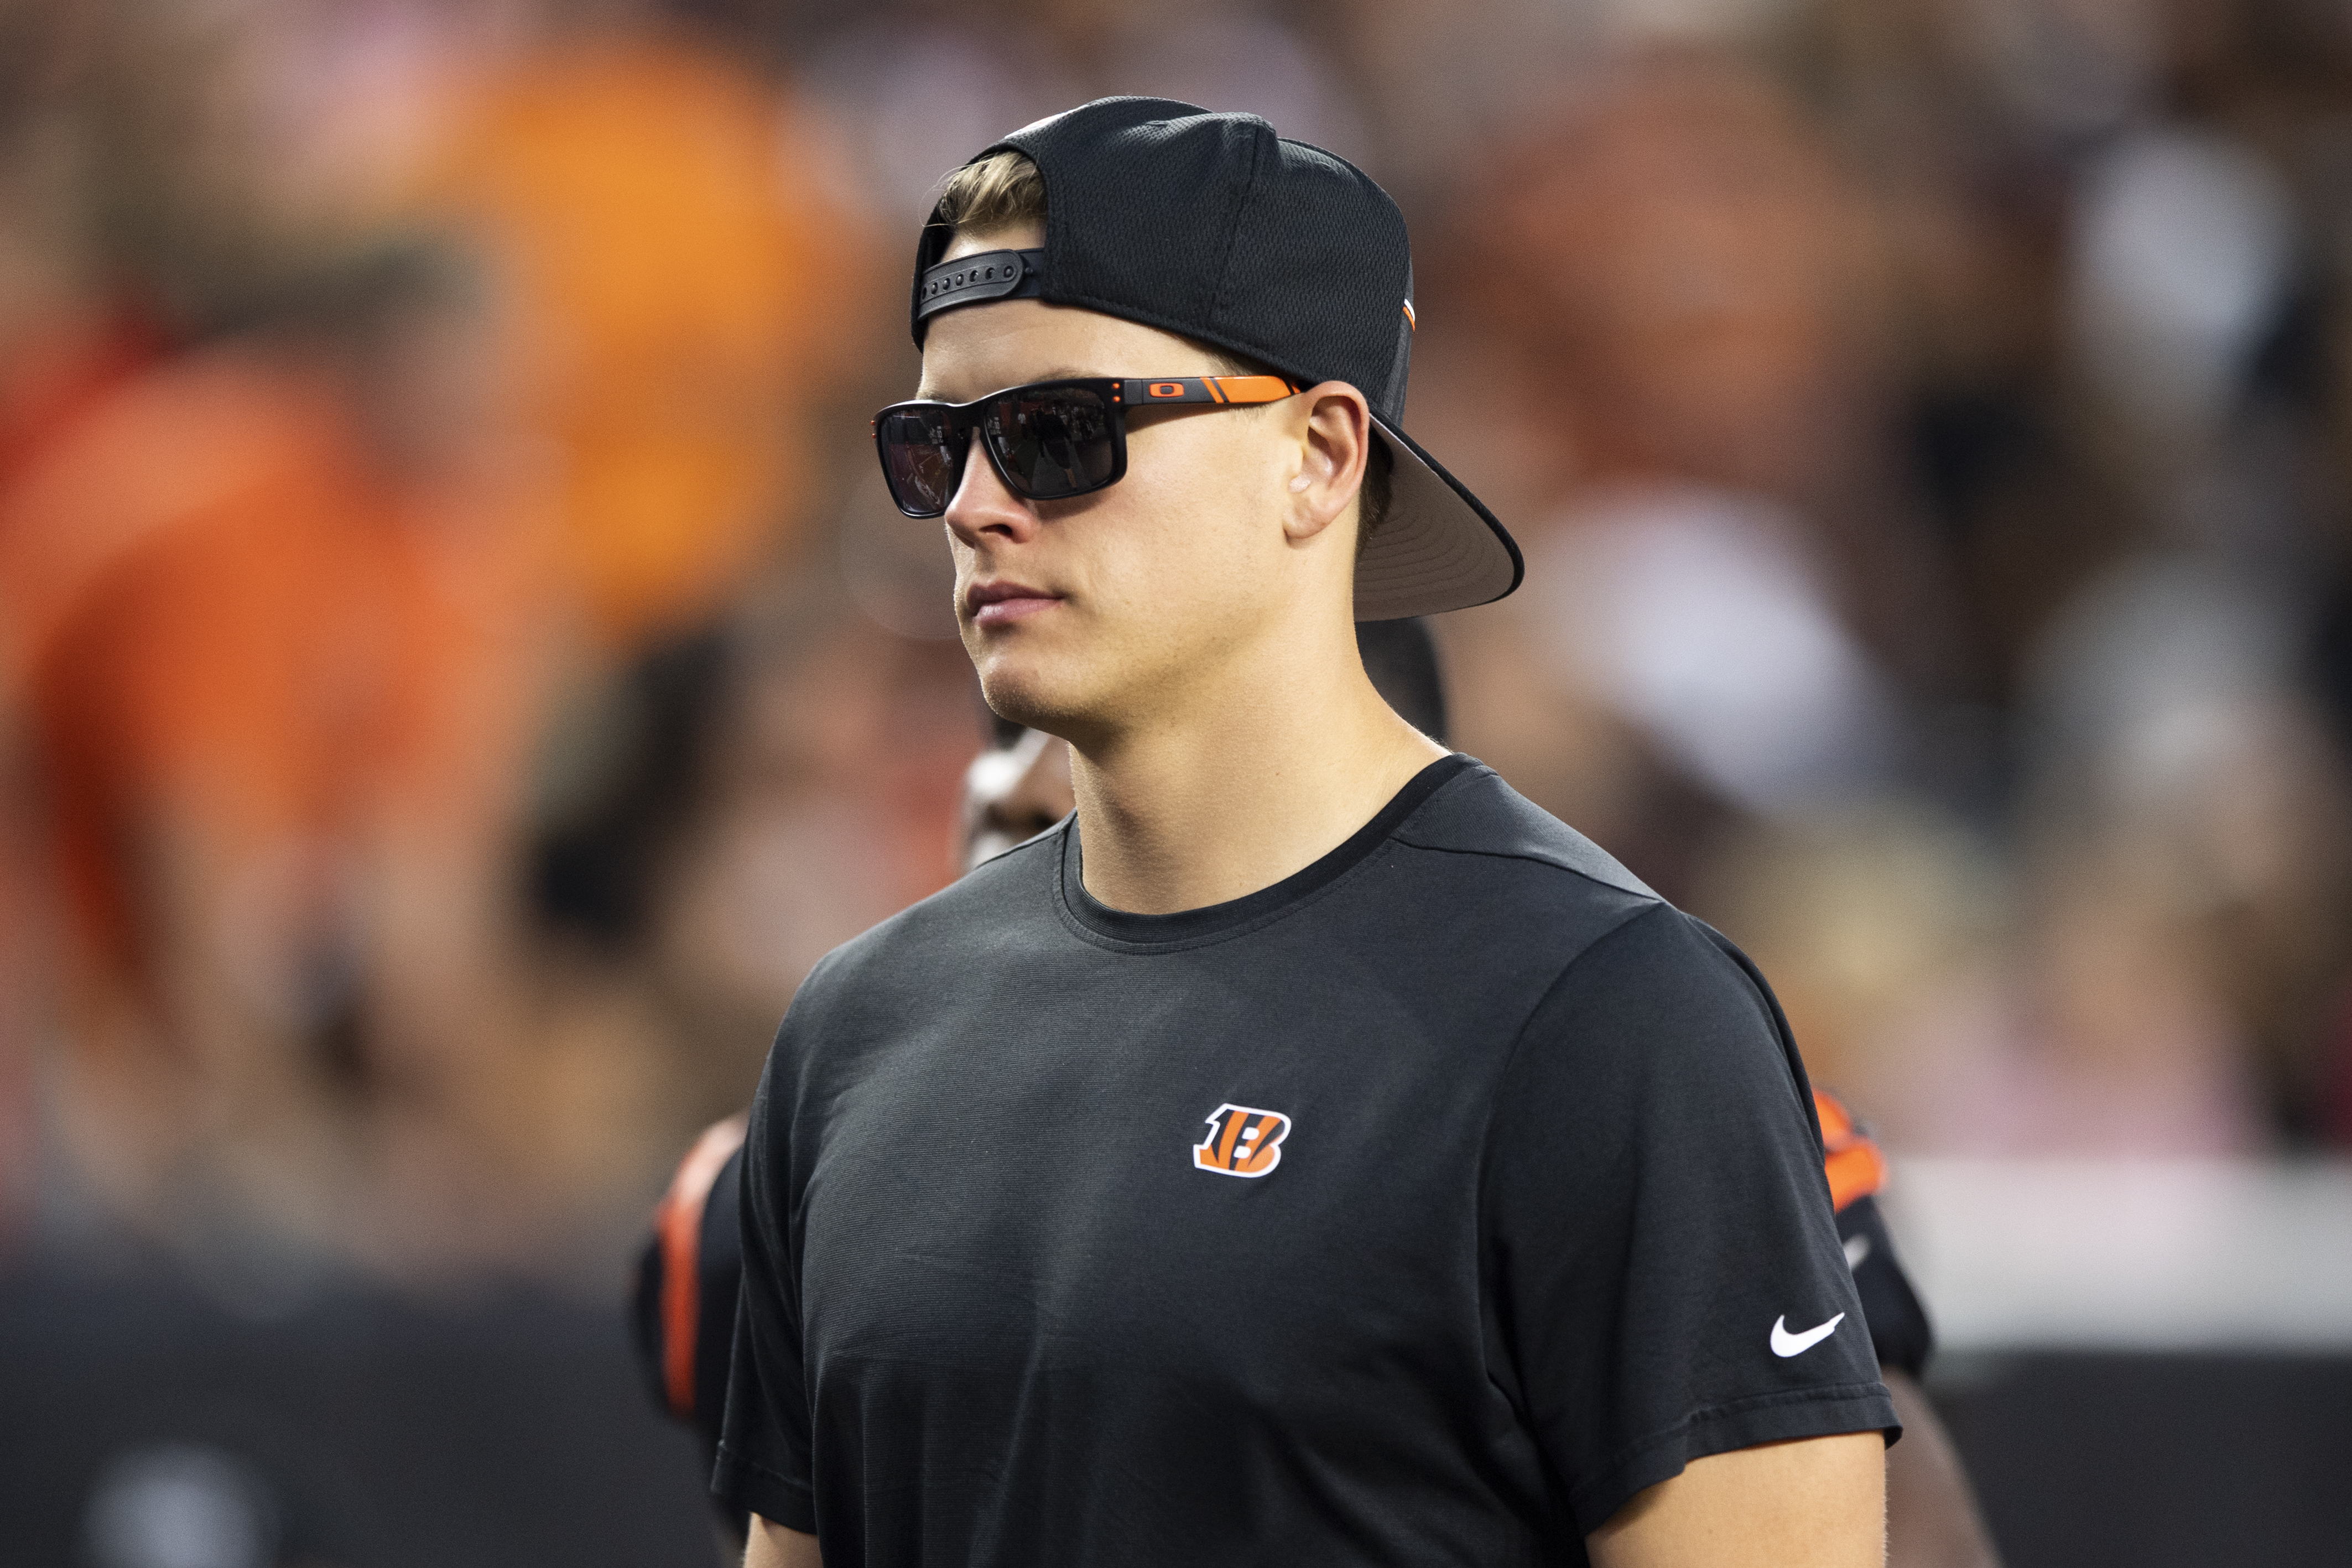 Bengals QB Joe Burrow becomes NFL's highest-paid player with $275 million  deal, AP source says